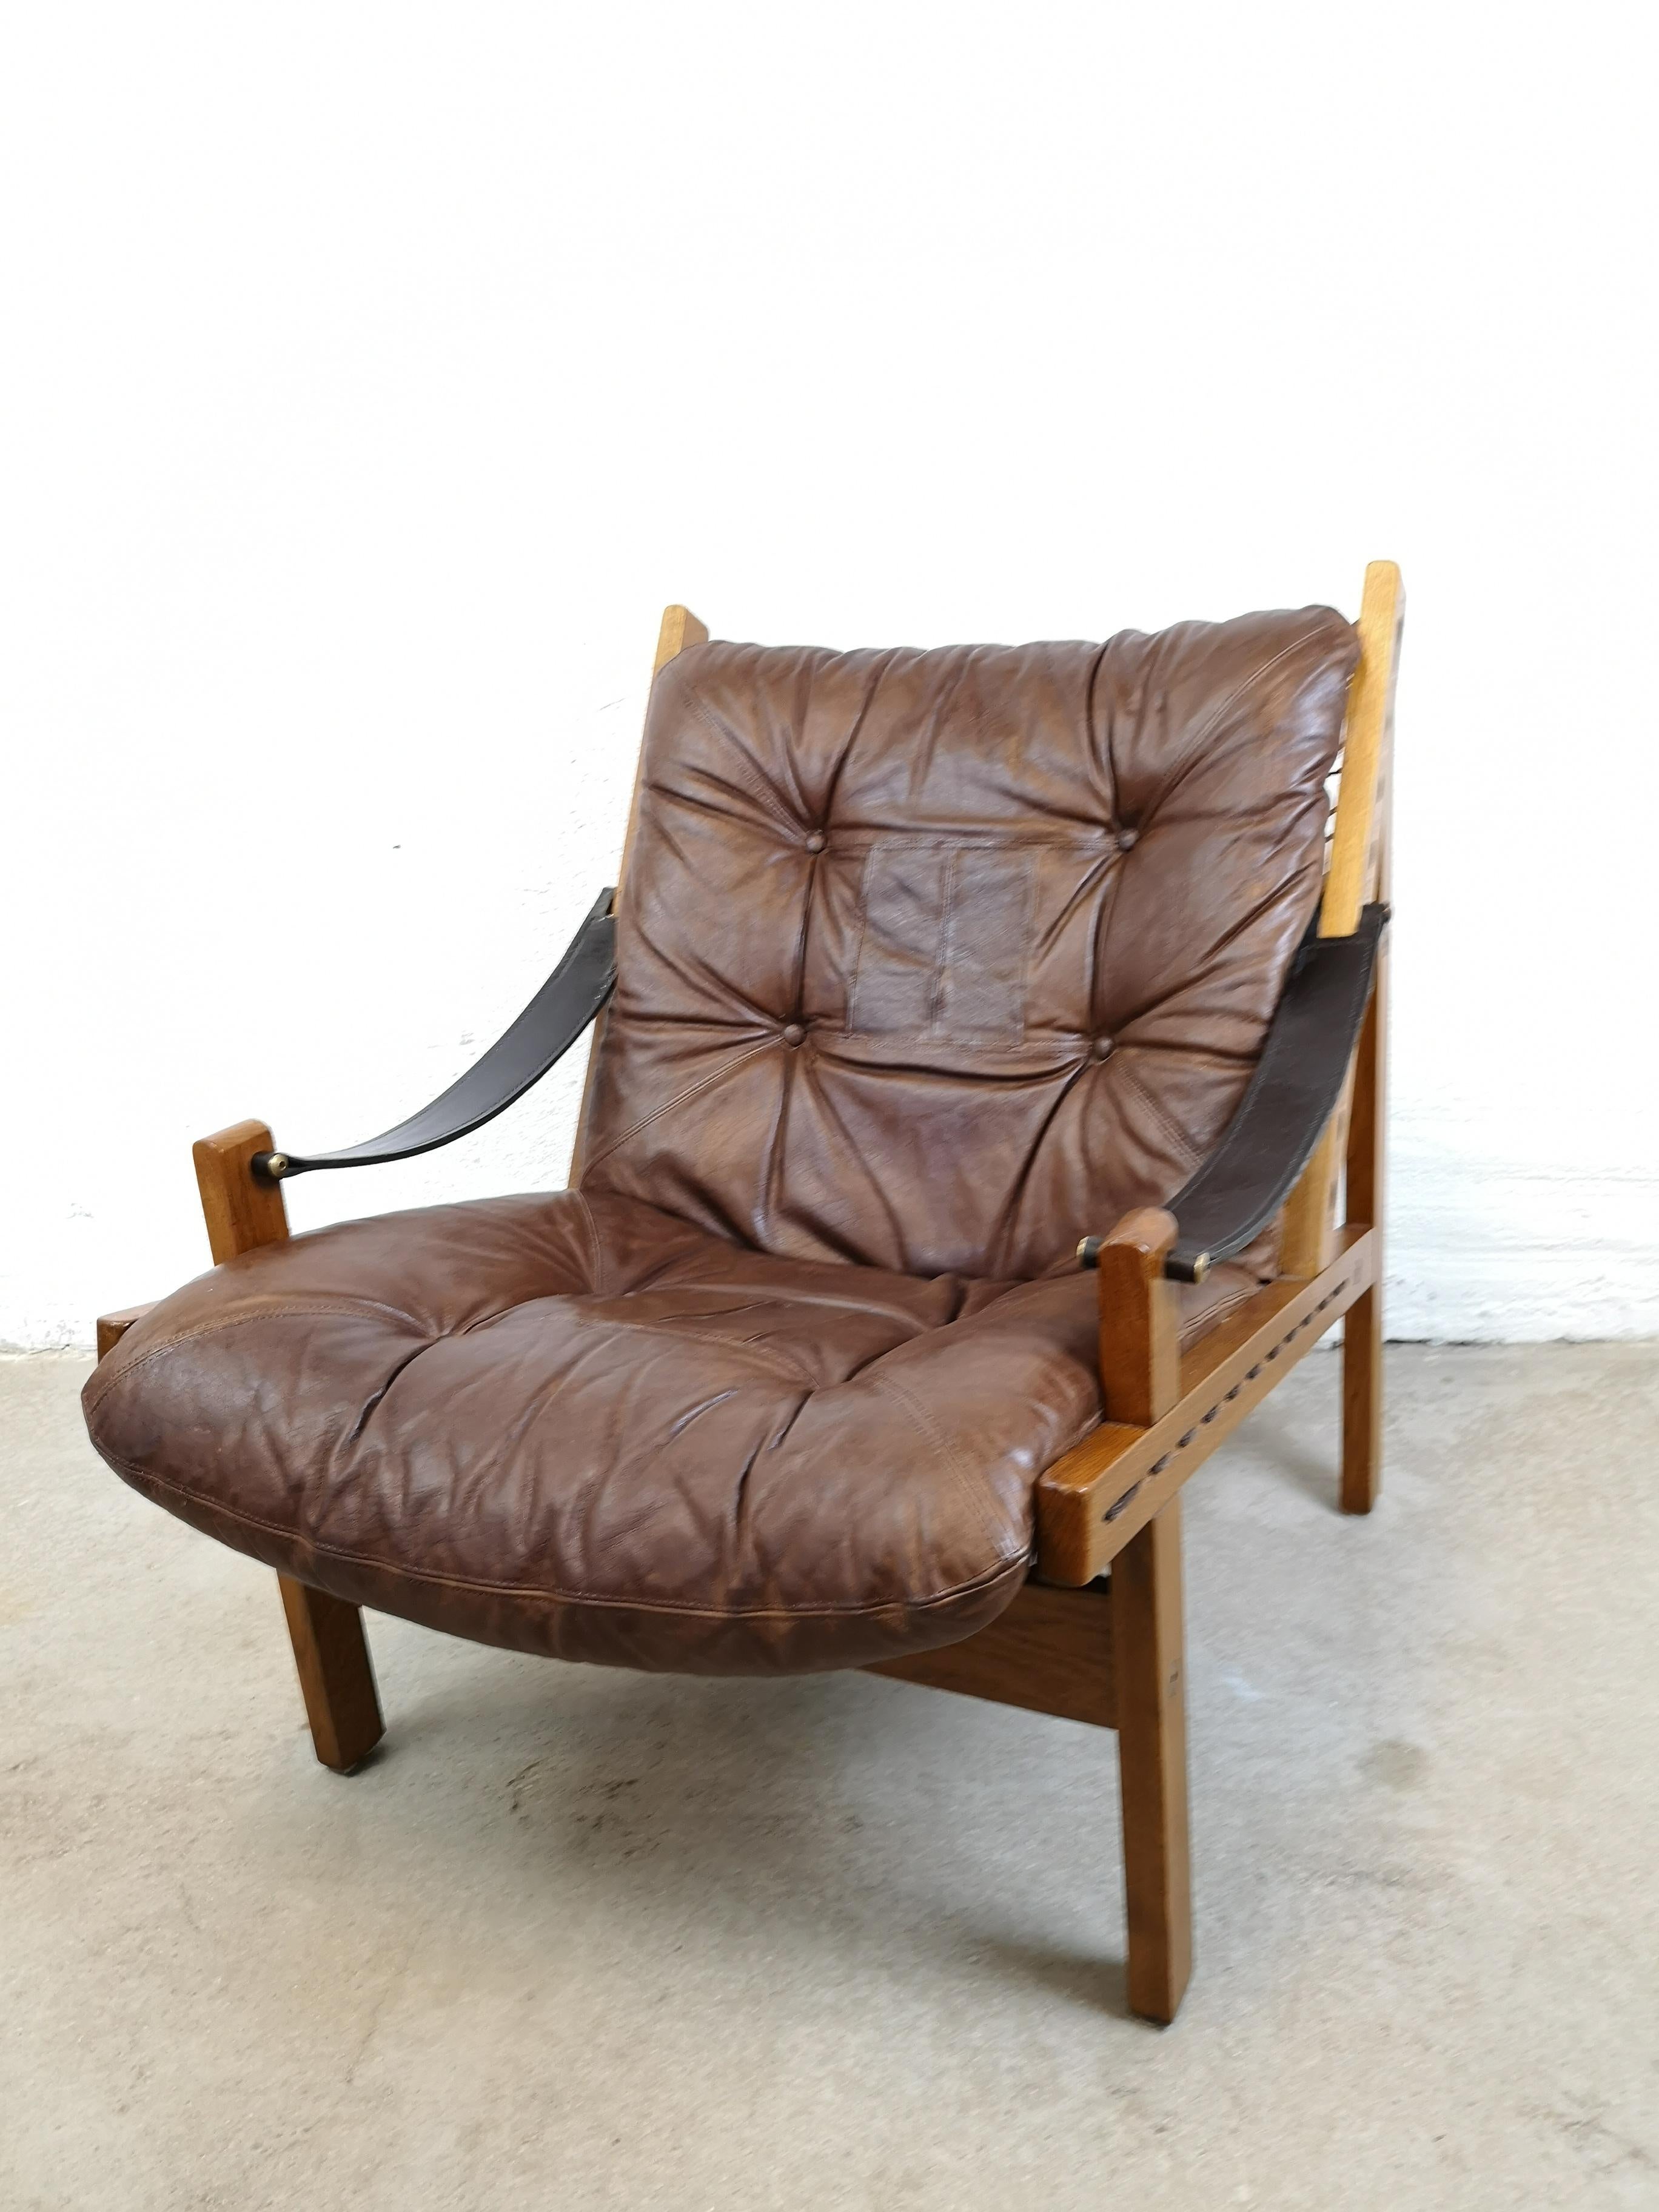 Midcentury Nordic ‘Hunter’ lounge chair designed by Torbjorn Afdal. Oak frame with dark brown leather upholstery. Produced by Bruksbo, Norway in the early 1960s.
Wonderful Norwegian design and extremely comfortable.

Very good condition, with a